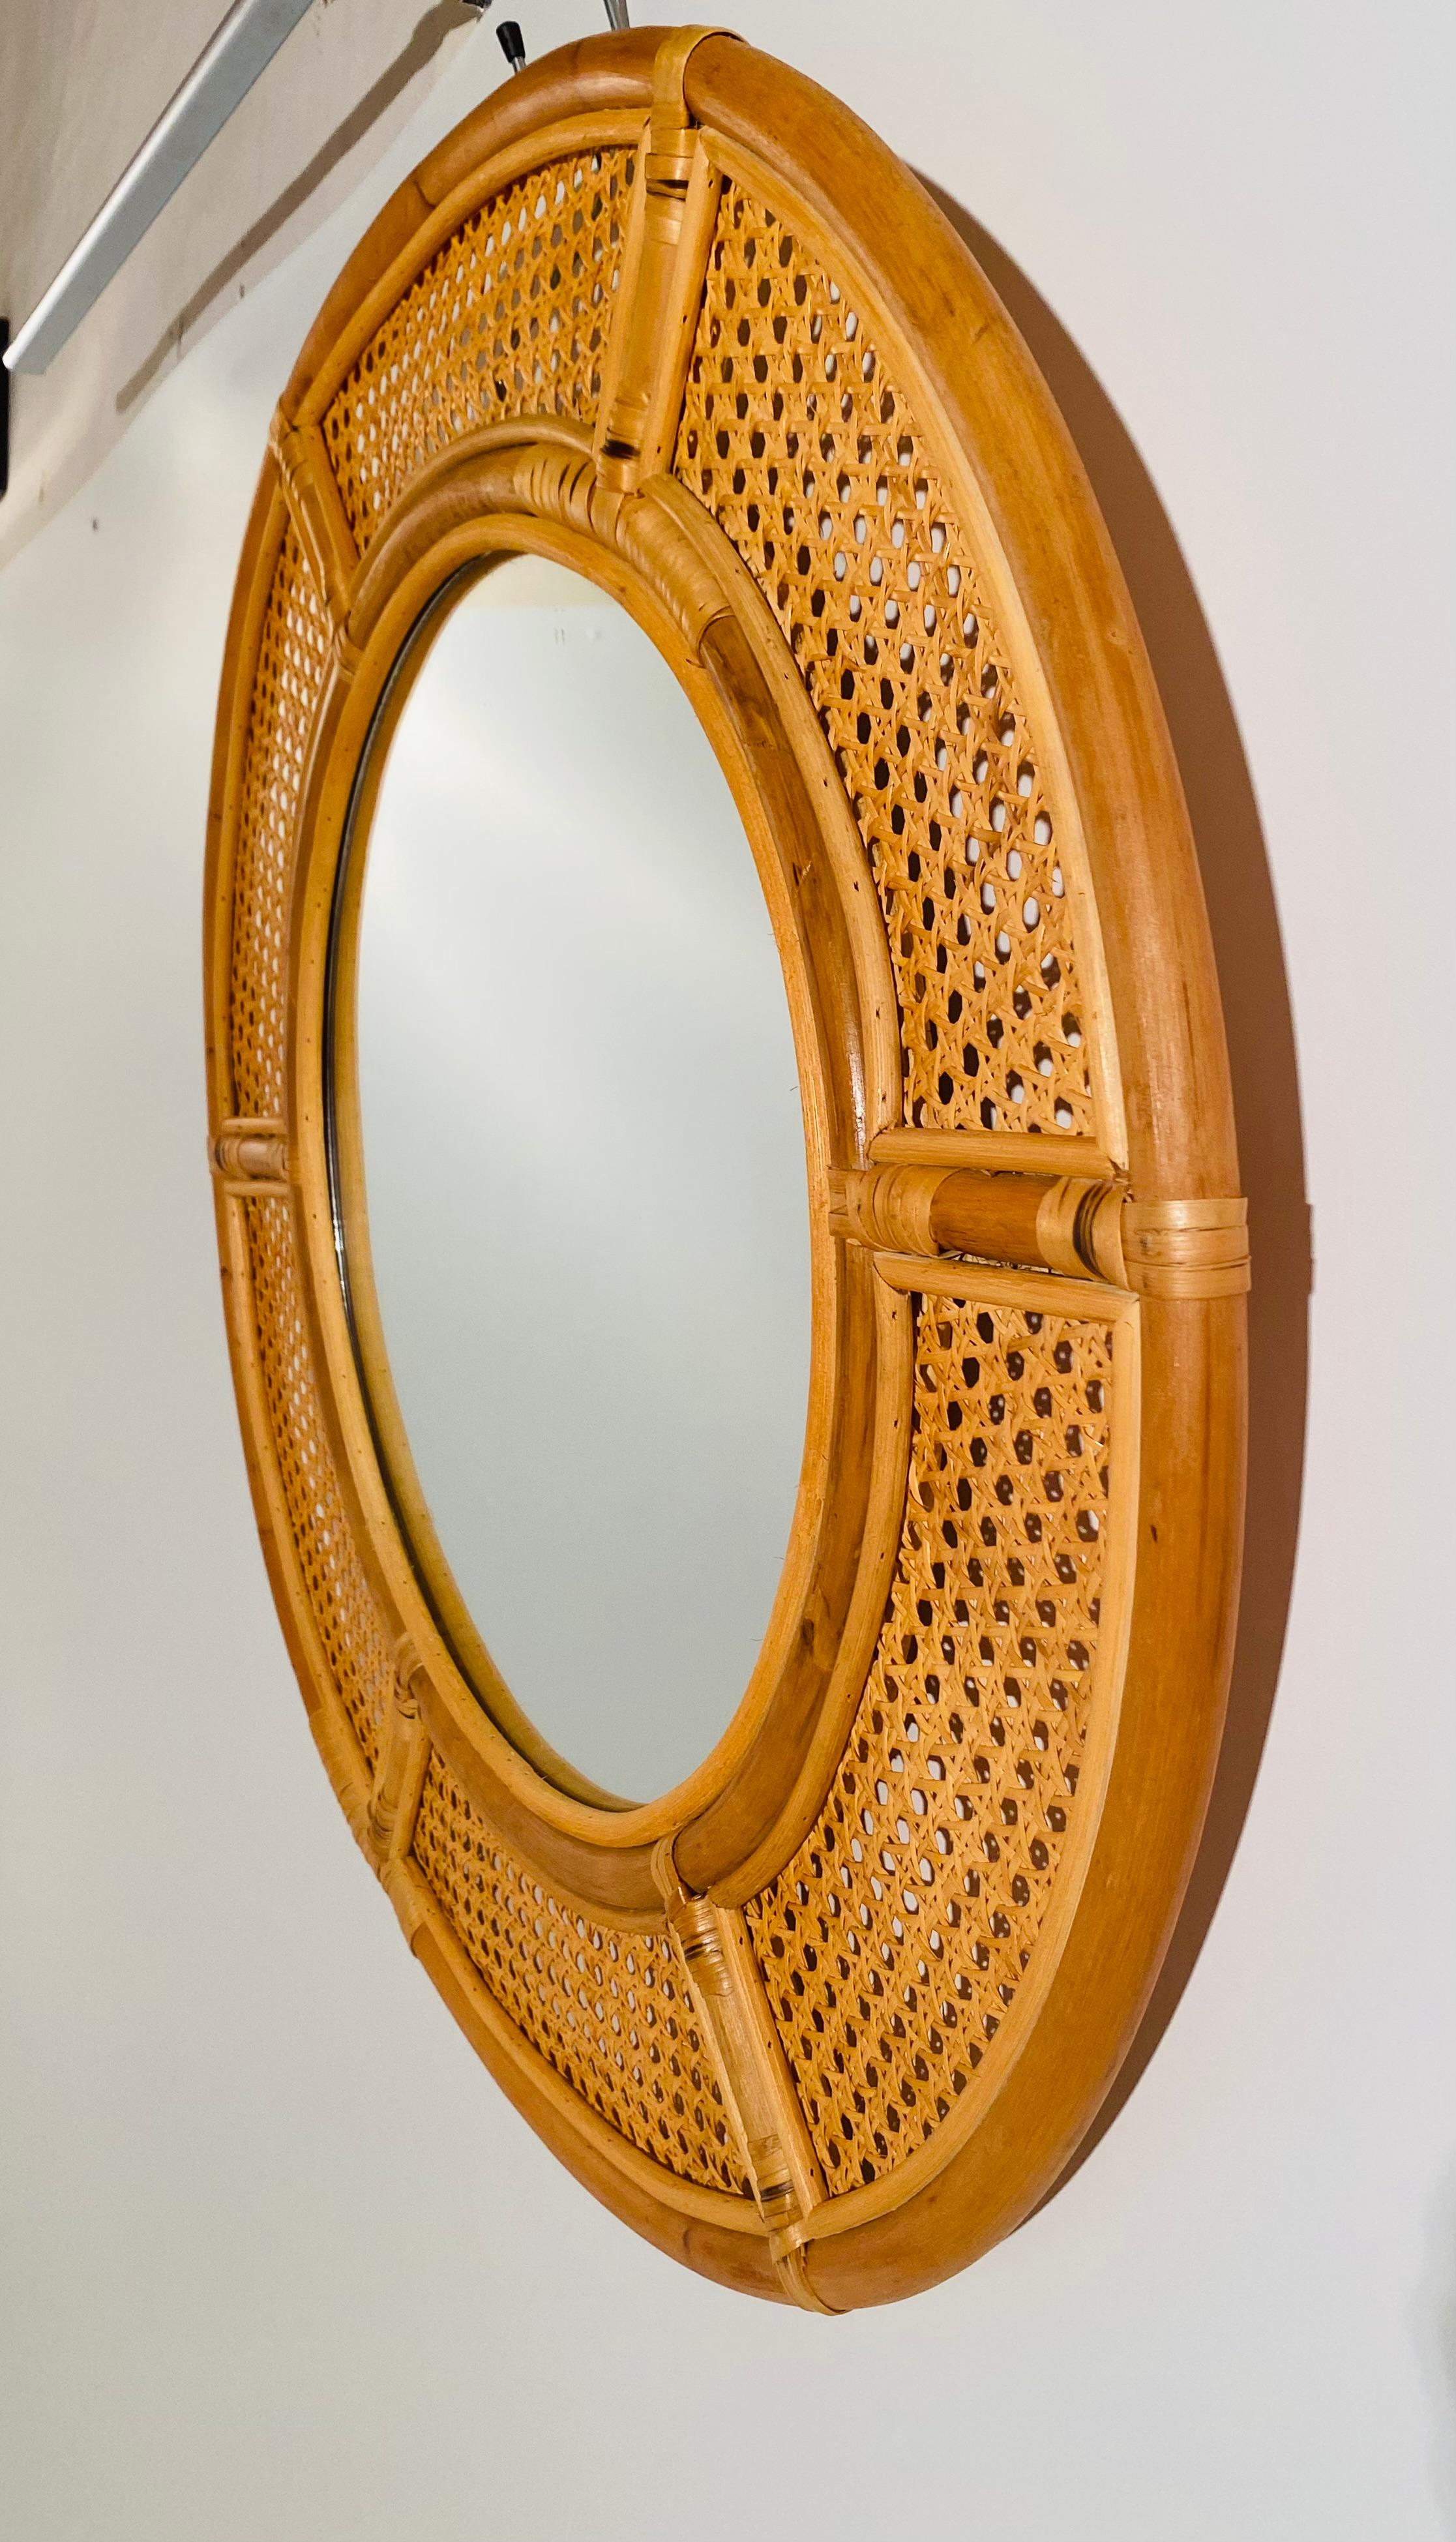 Rattan vintage mirror, Italy 1980s.
A cosy 1980s rattan round wall mirror. No damages to both cane and rattan. Original mirror glass. Manufactured in Italy. In very good conditions.